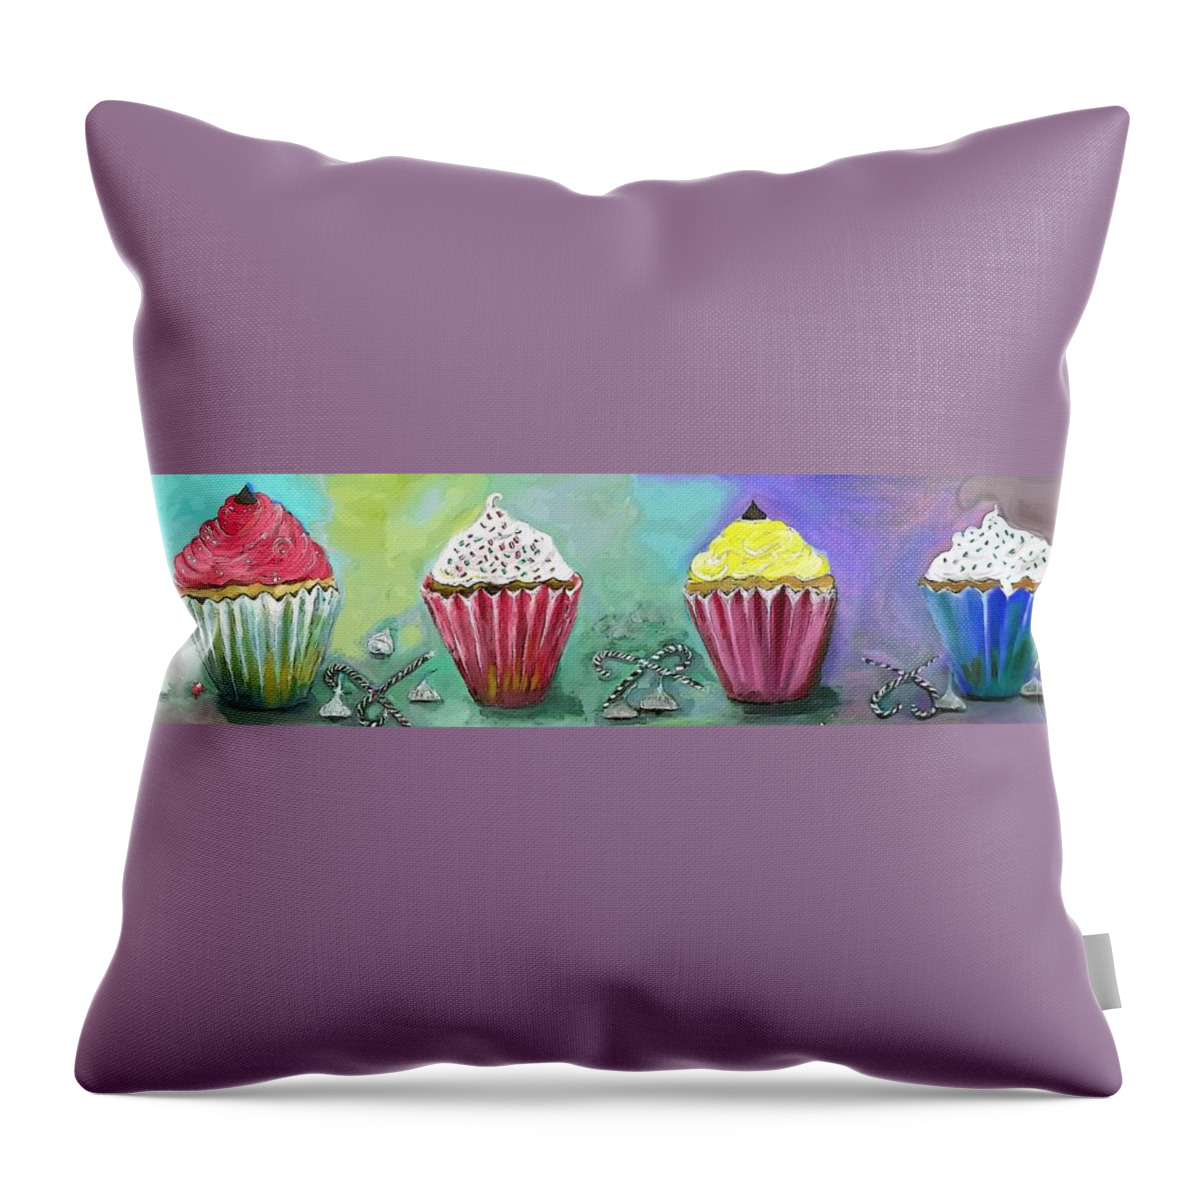 Cupcake Throw Pillow featuring the digital art Cupcake Decorations And Candies Painting by Lisa Kaiser